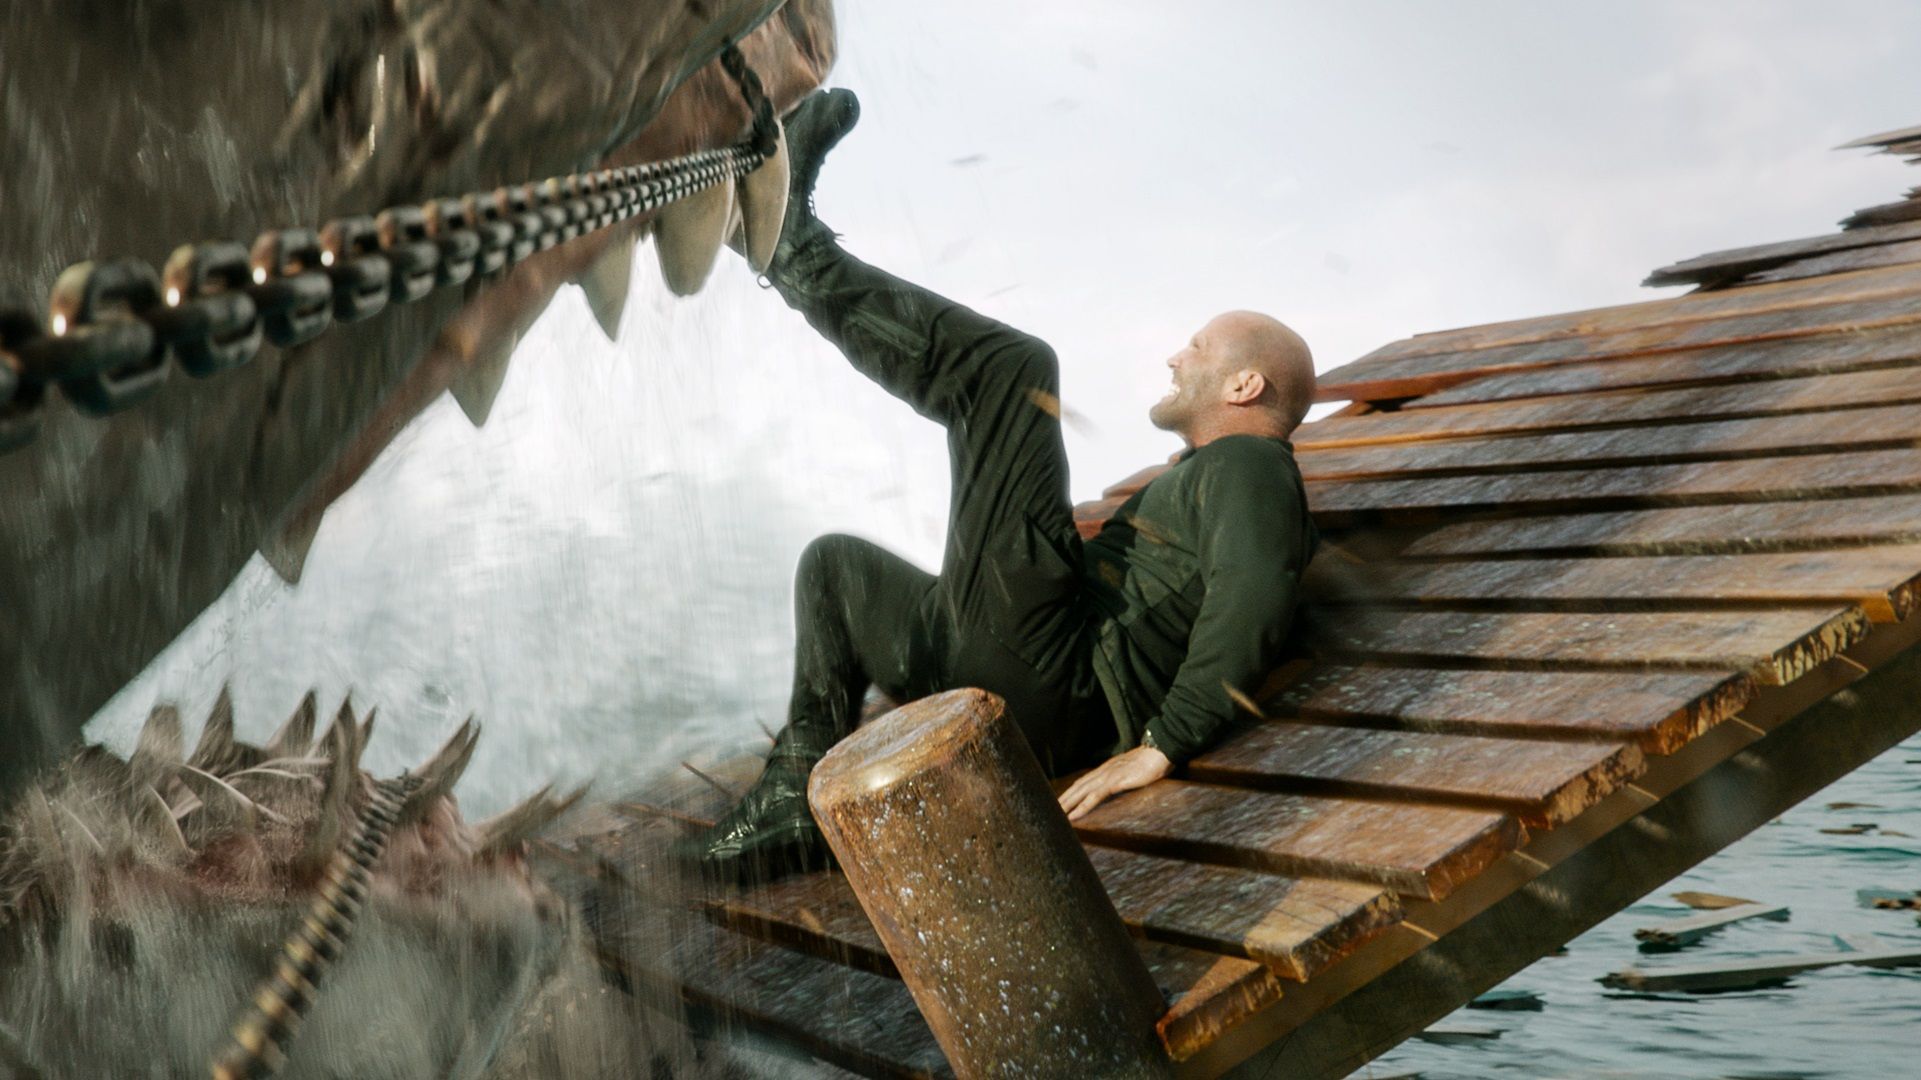 The Most Dangerous Stunts Jason Statham Did In His Movies